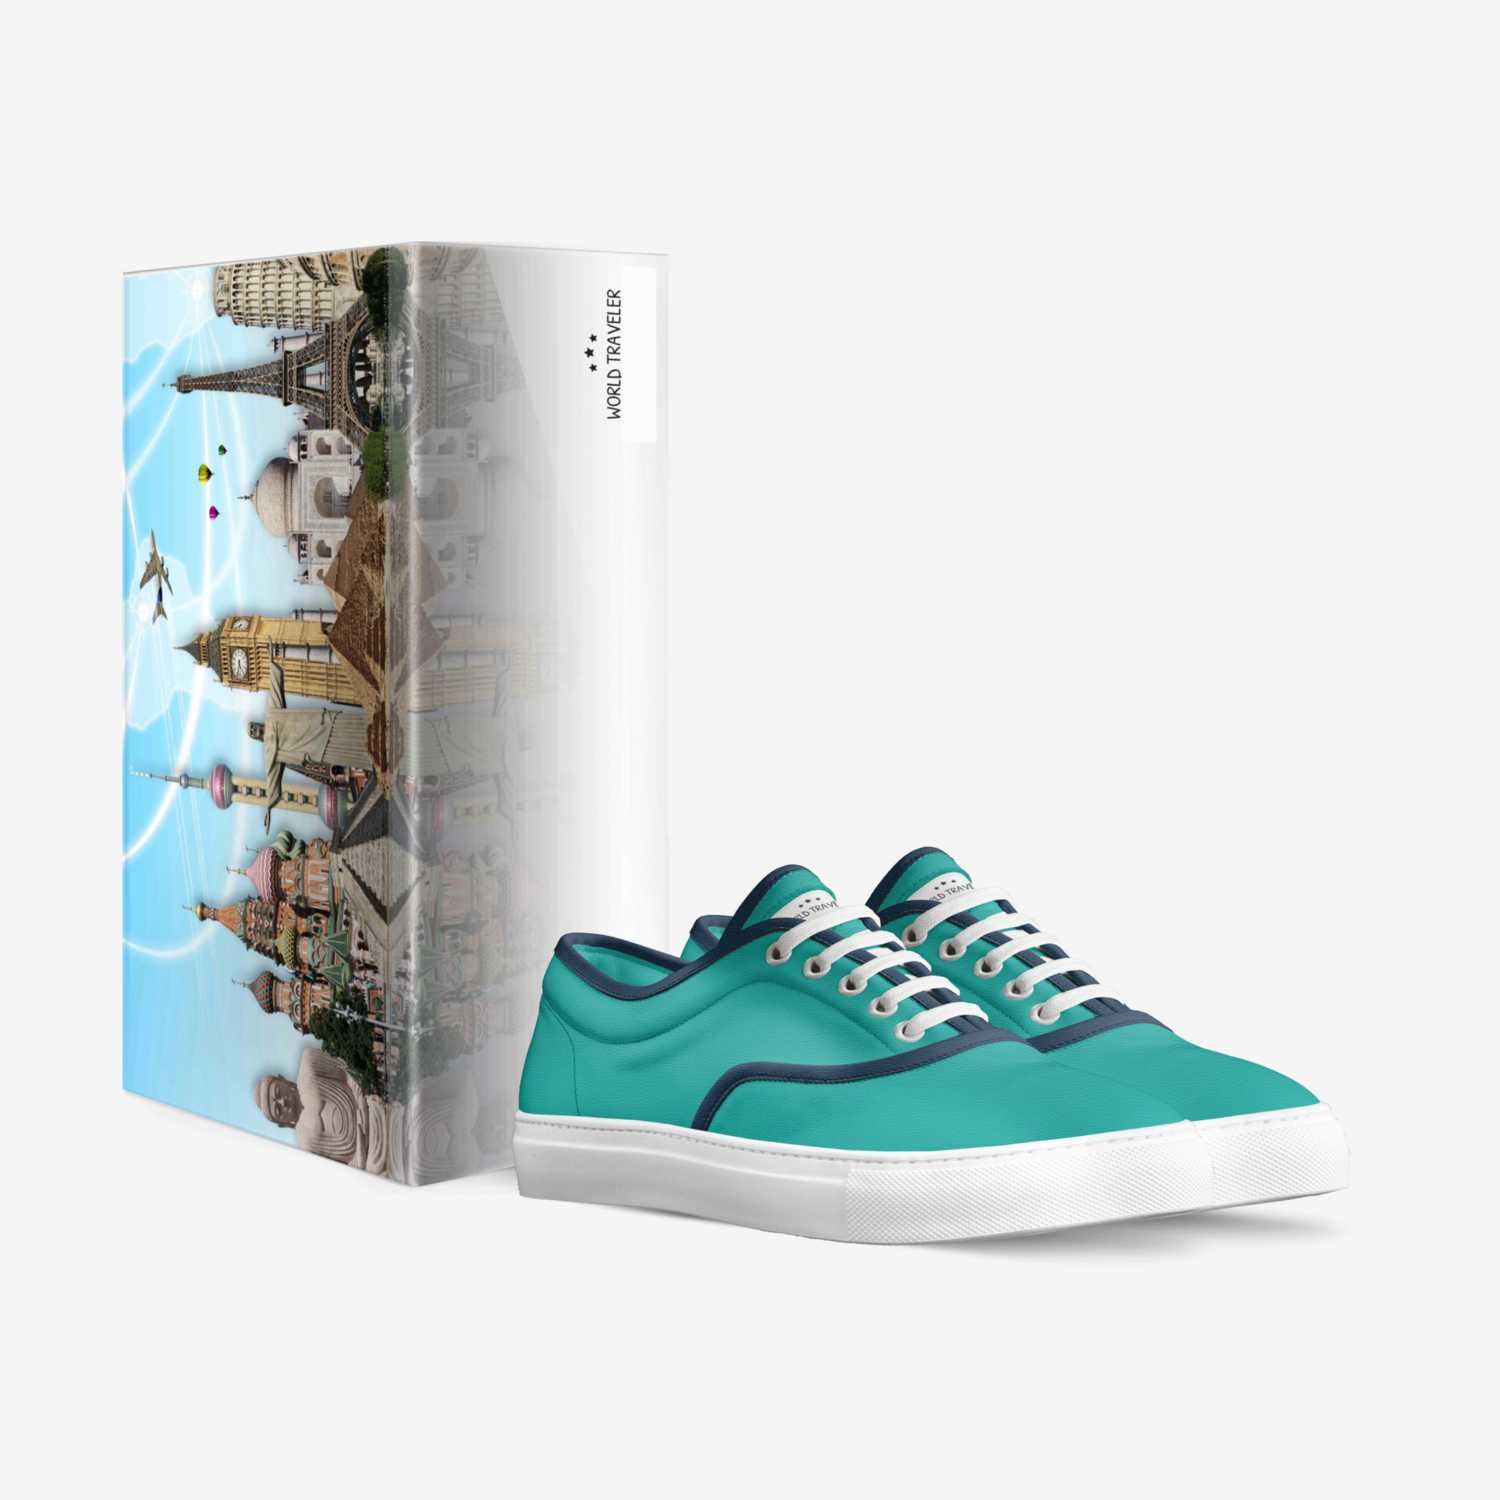 World Traveler custom made in Italy shoes by Haley | Box view